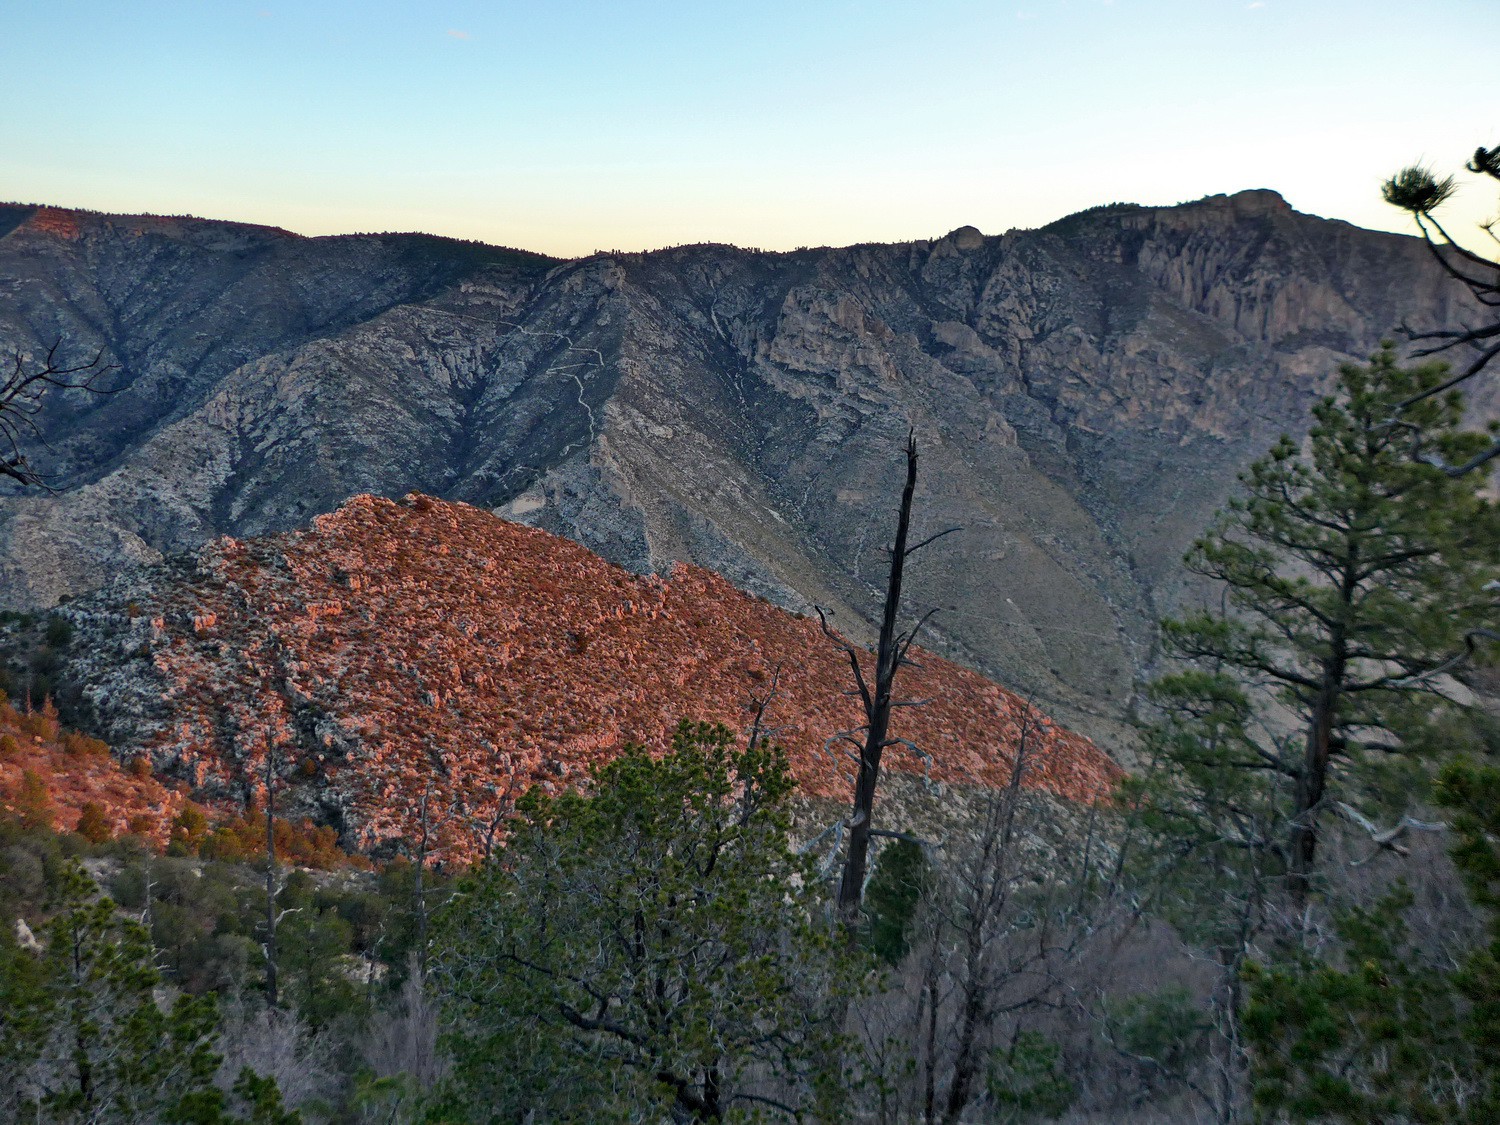 Hunter Peak at sunrise seen from the ascent to Guadalupe Peak